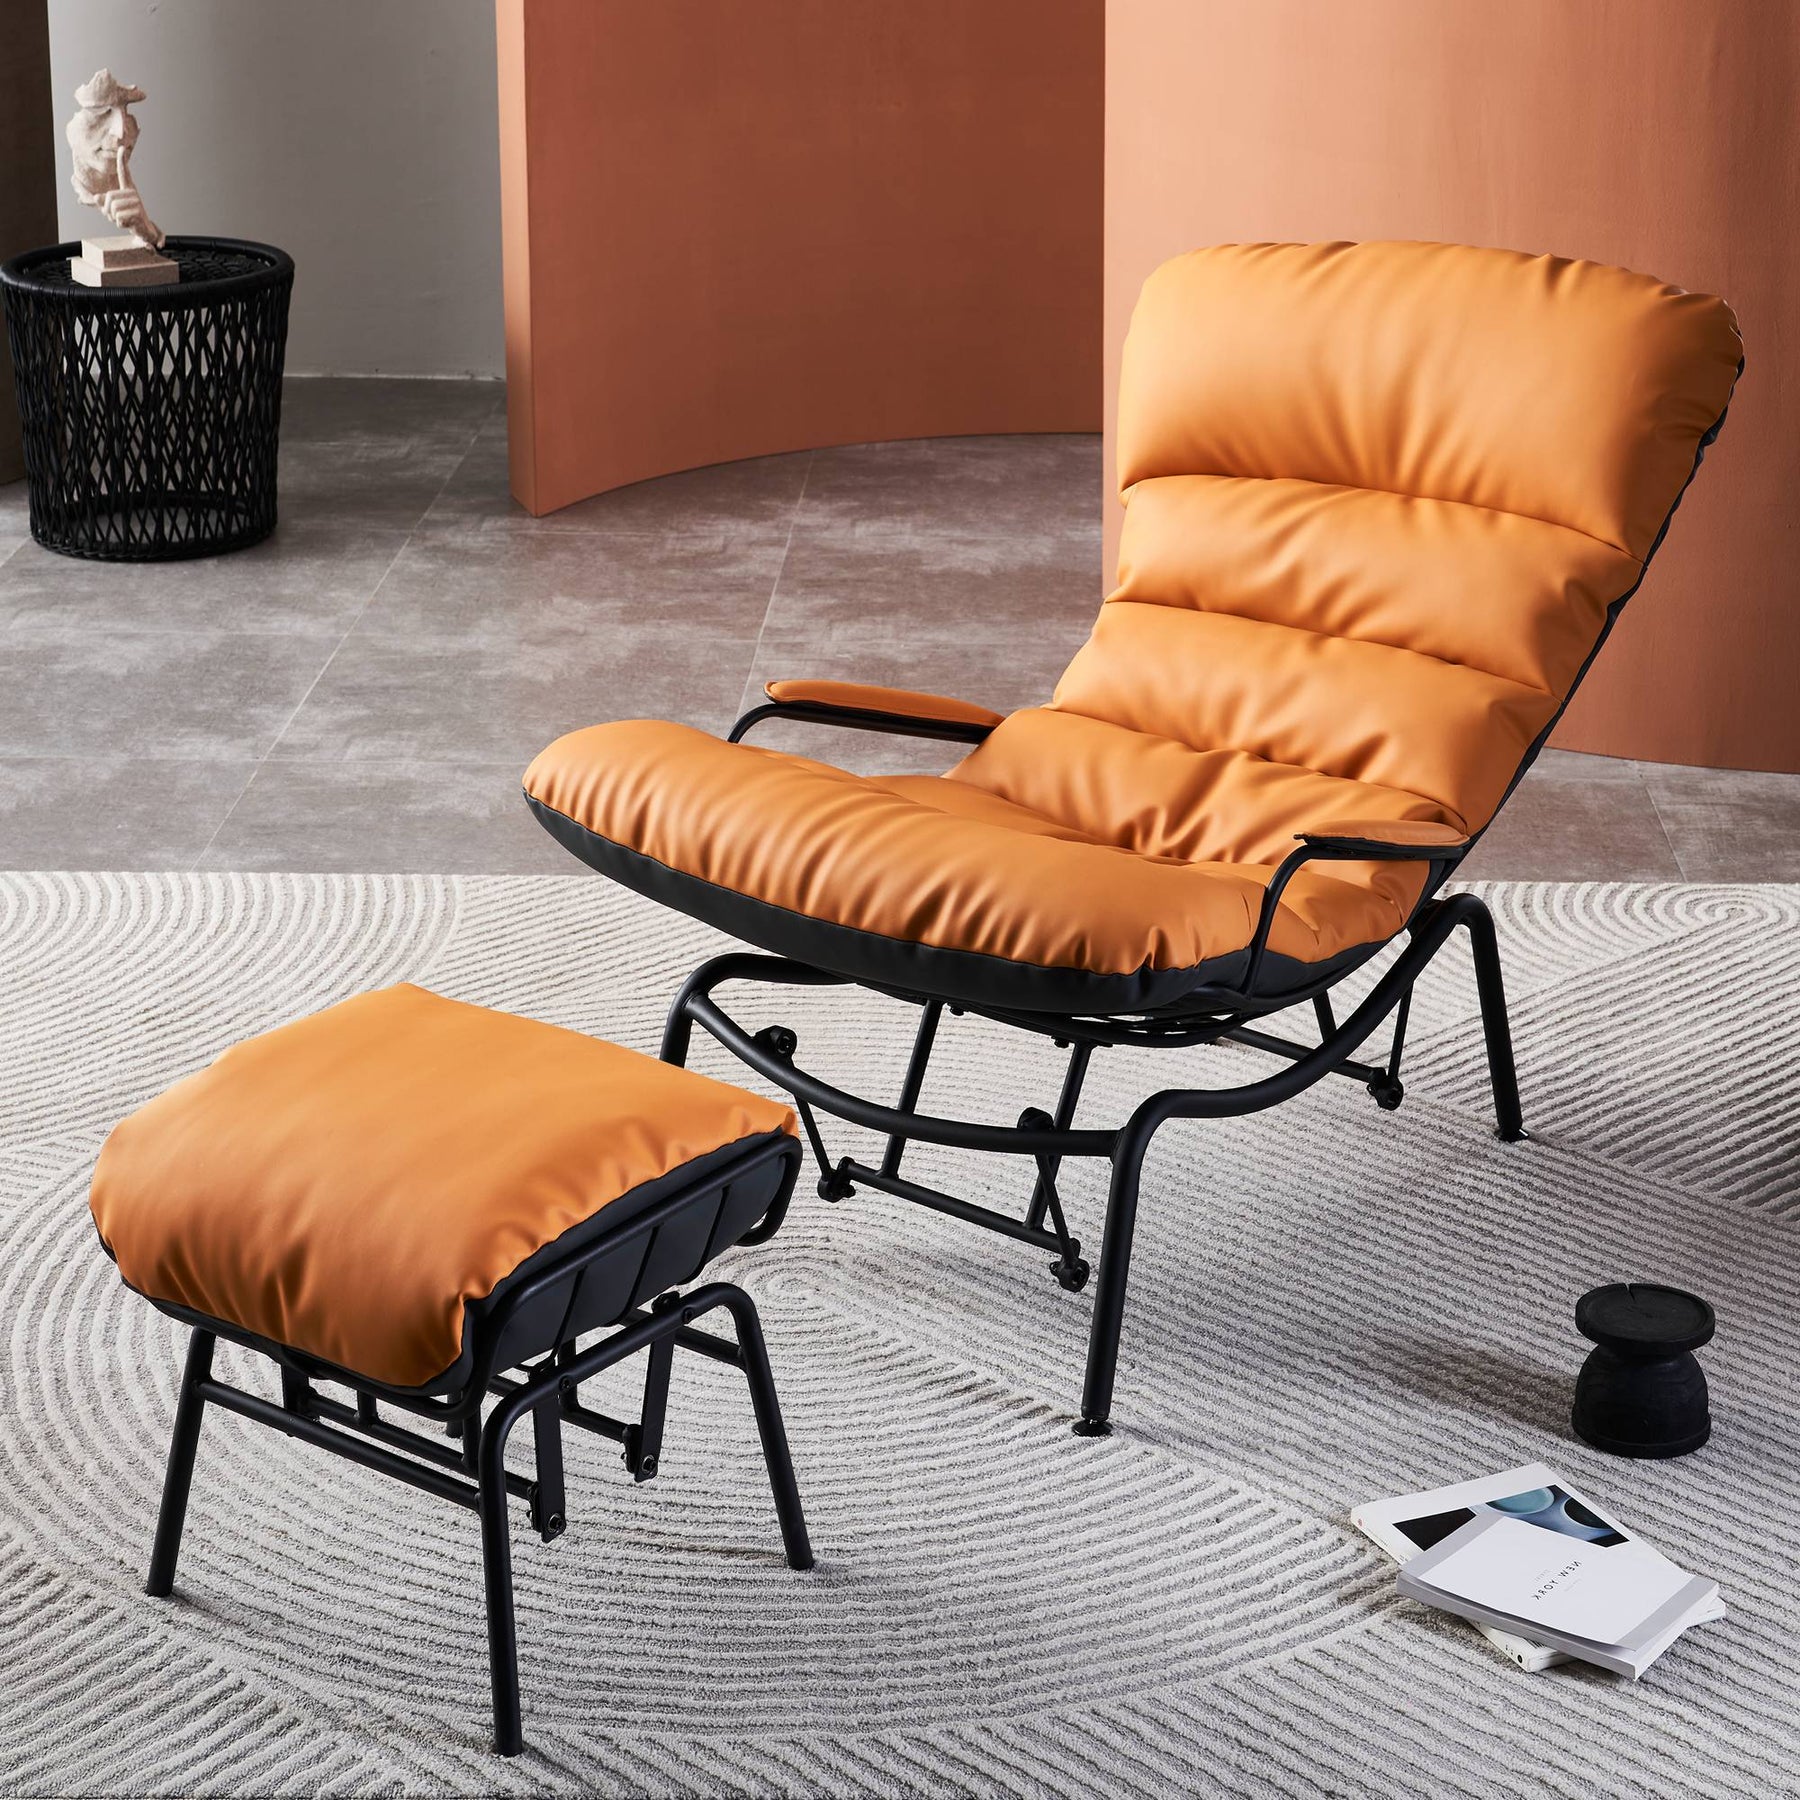 Ovios Rocking Chair Orange Leatherette with Ottoman, Metal Frame filled with Latex and Cotton